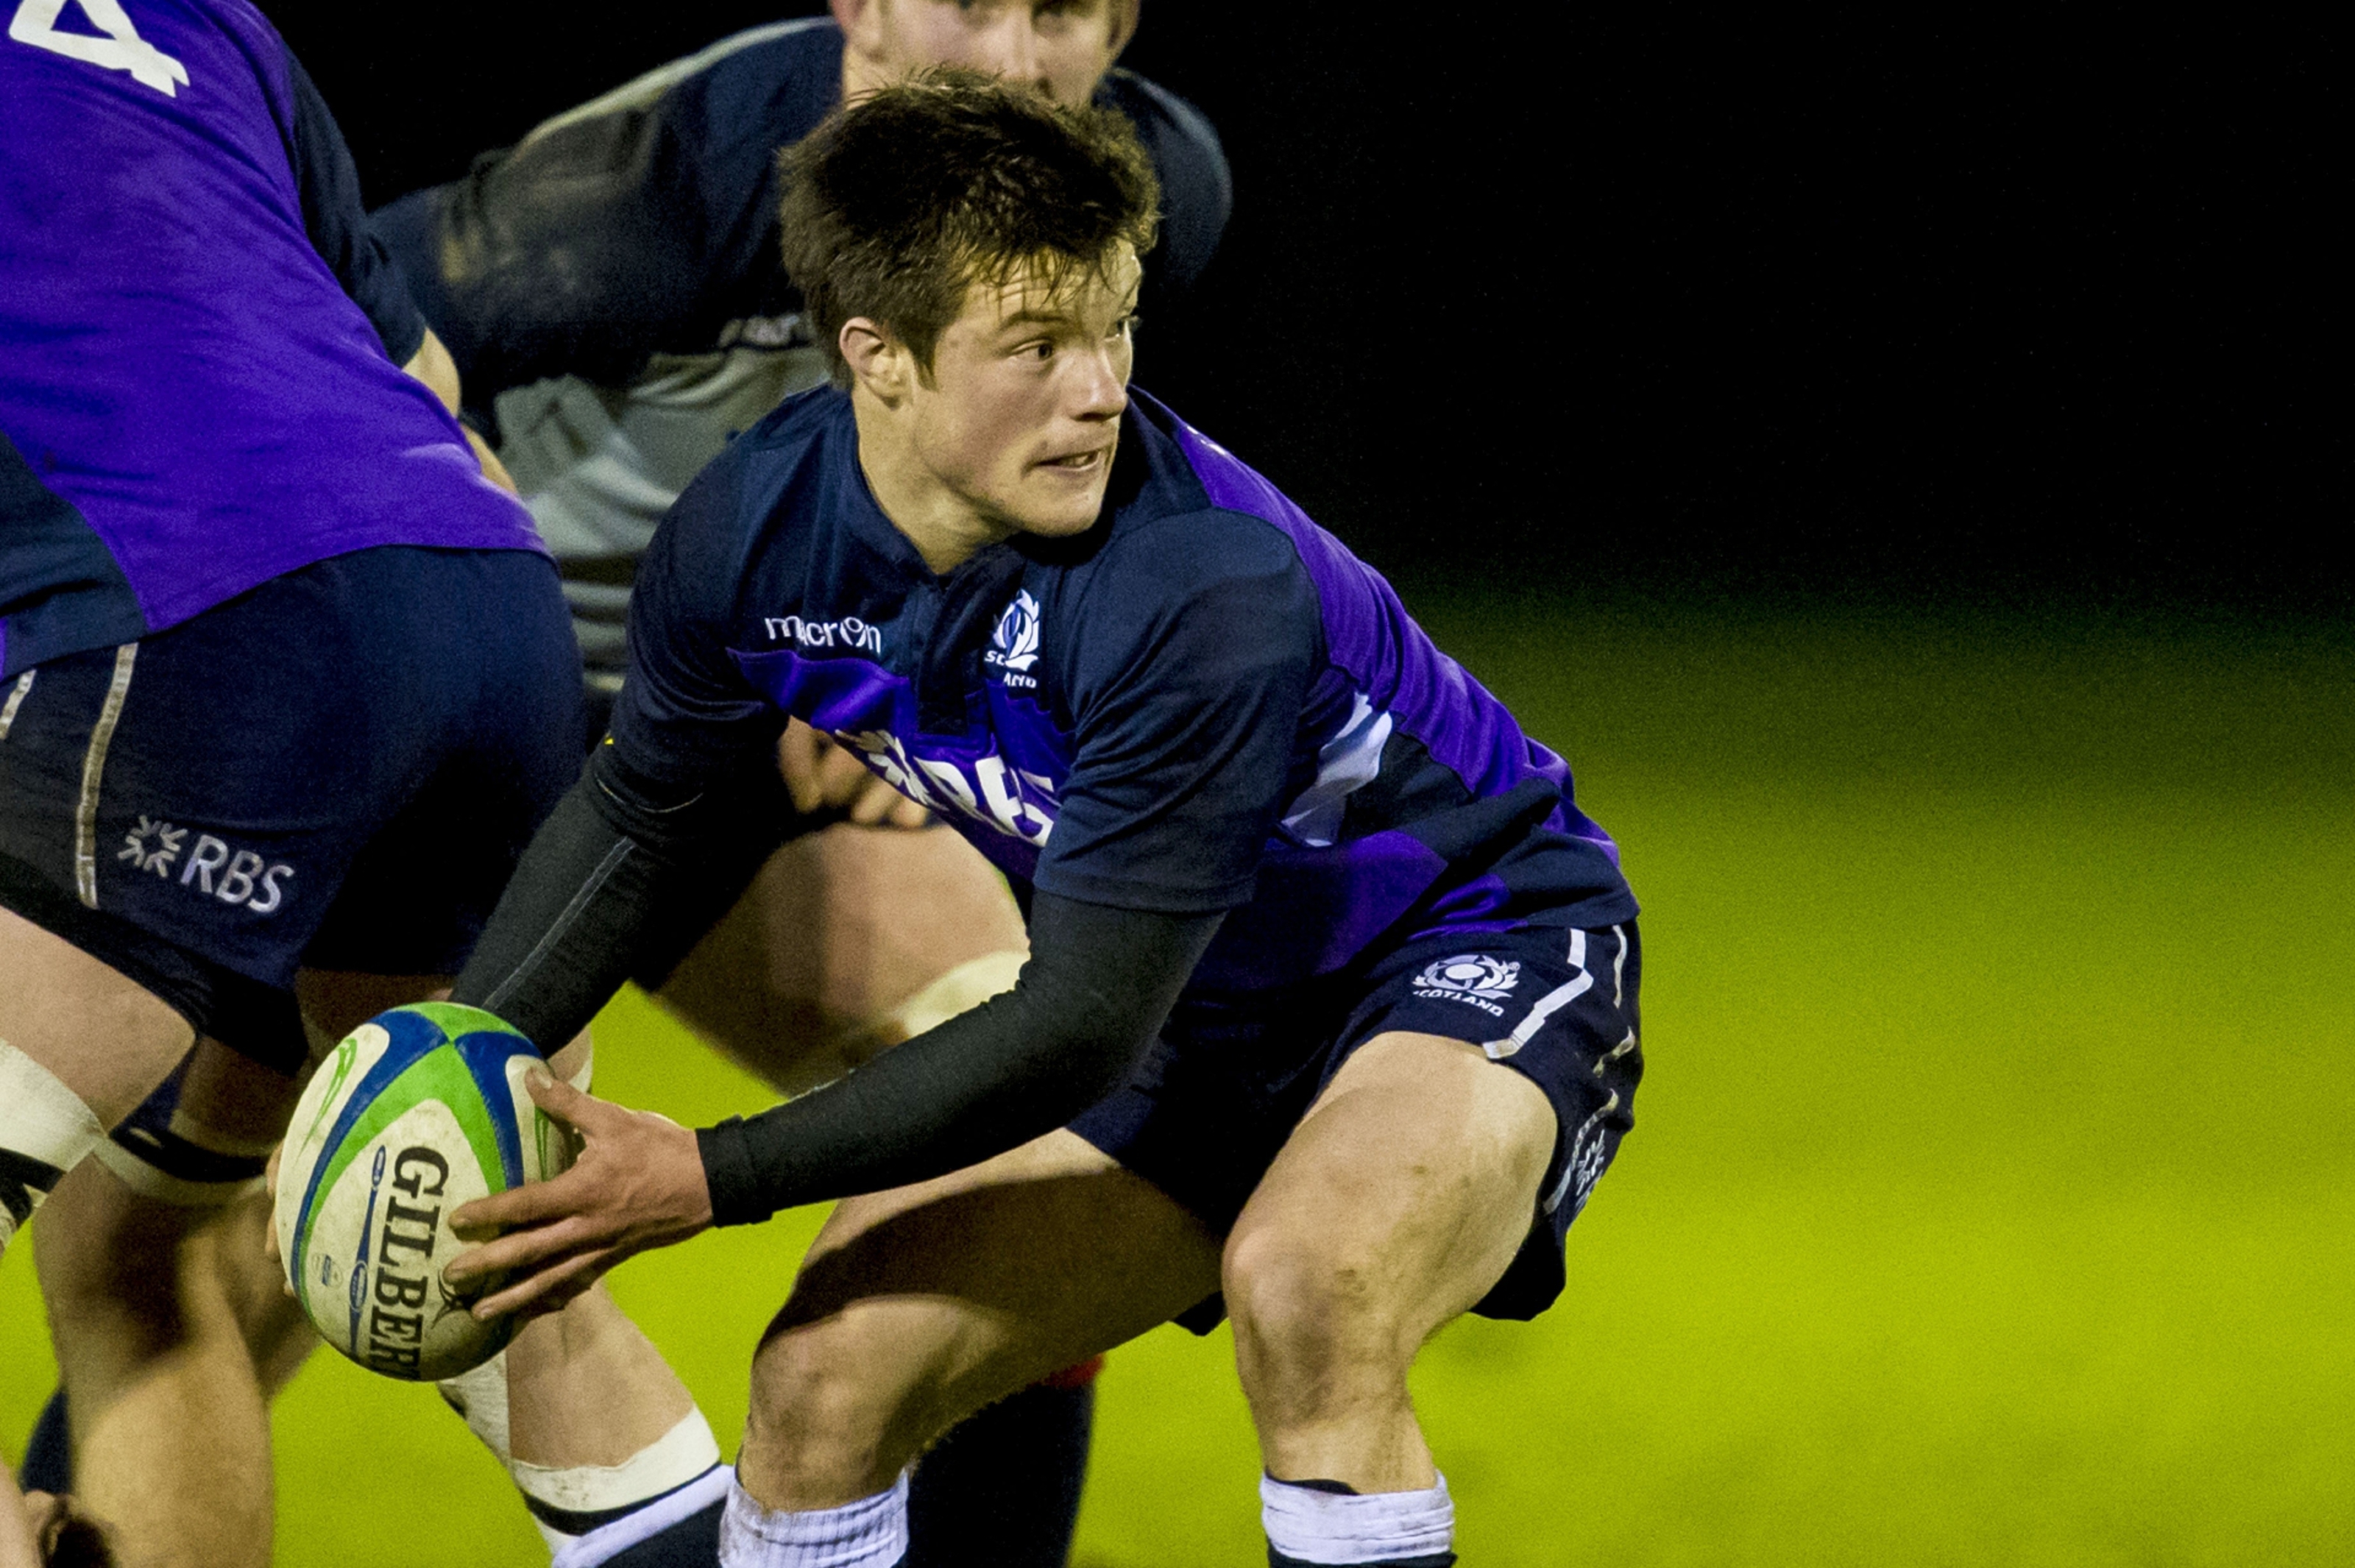 George Horne had a successful spell at London Scottish as part of the now collapsed agreement.